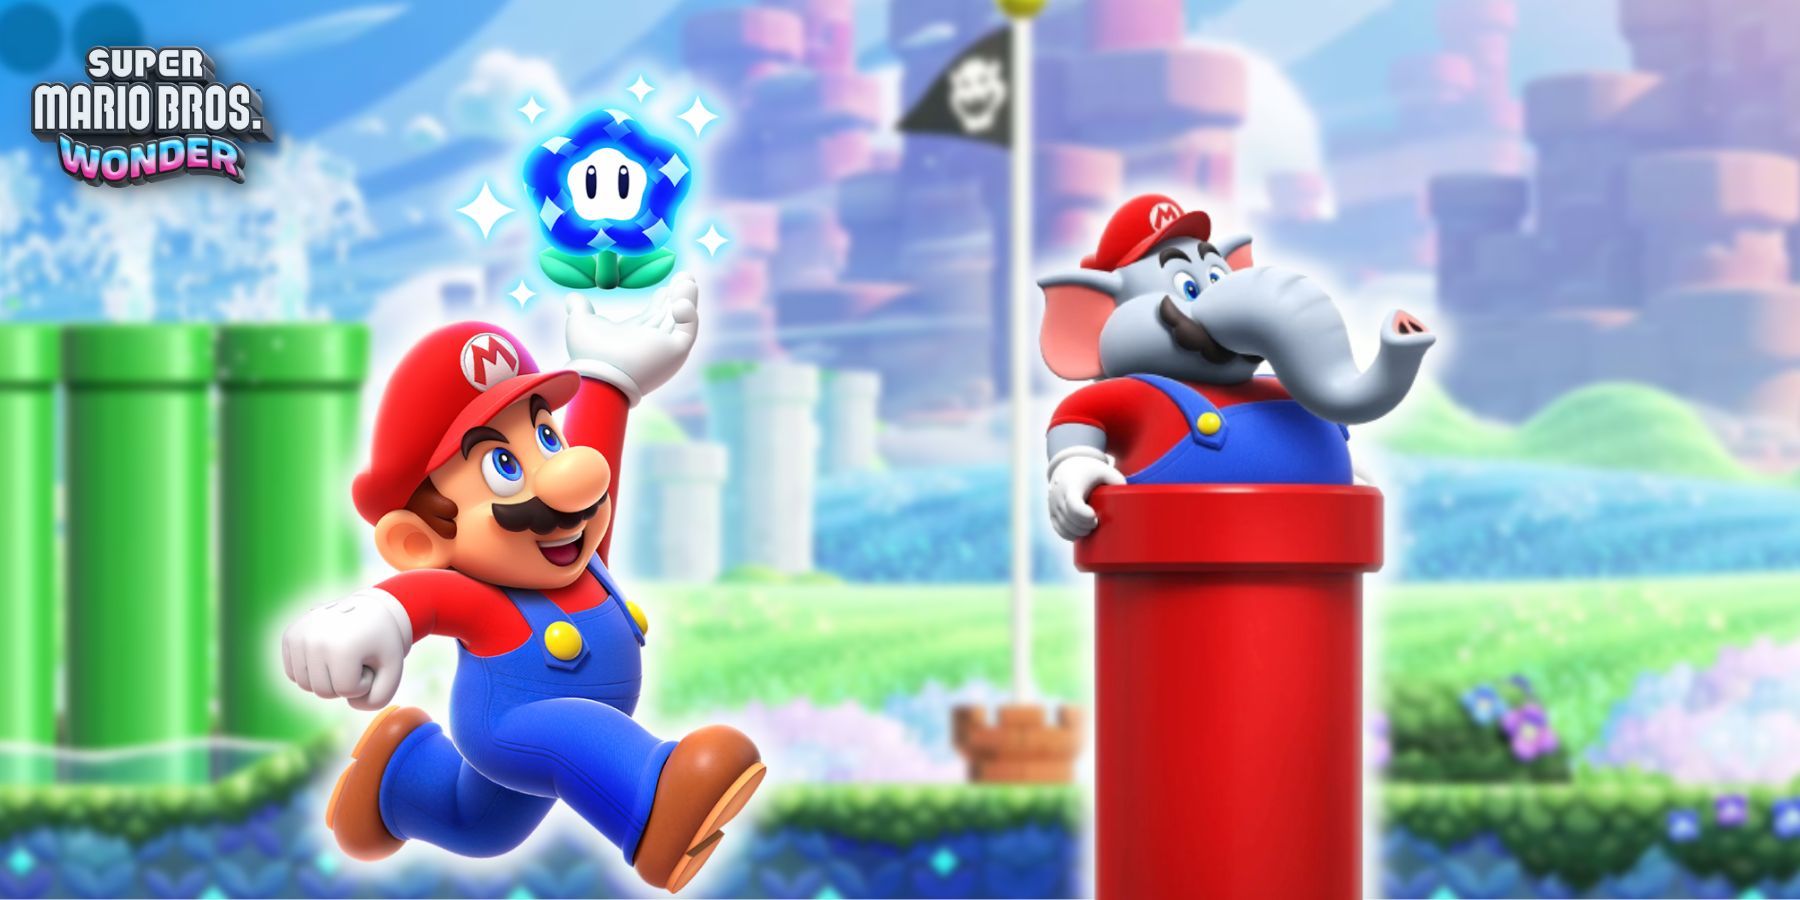 Every New Power-Up In Super Mario Bros. Wonder, Ranked